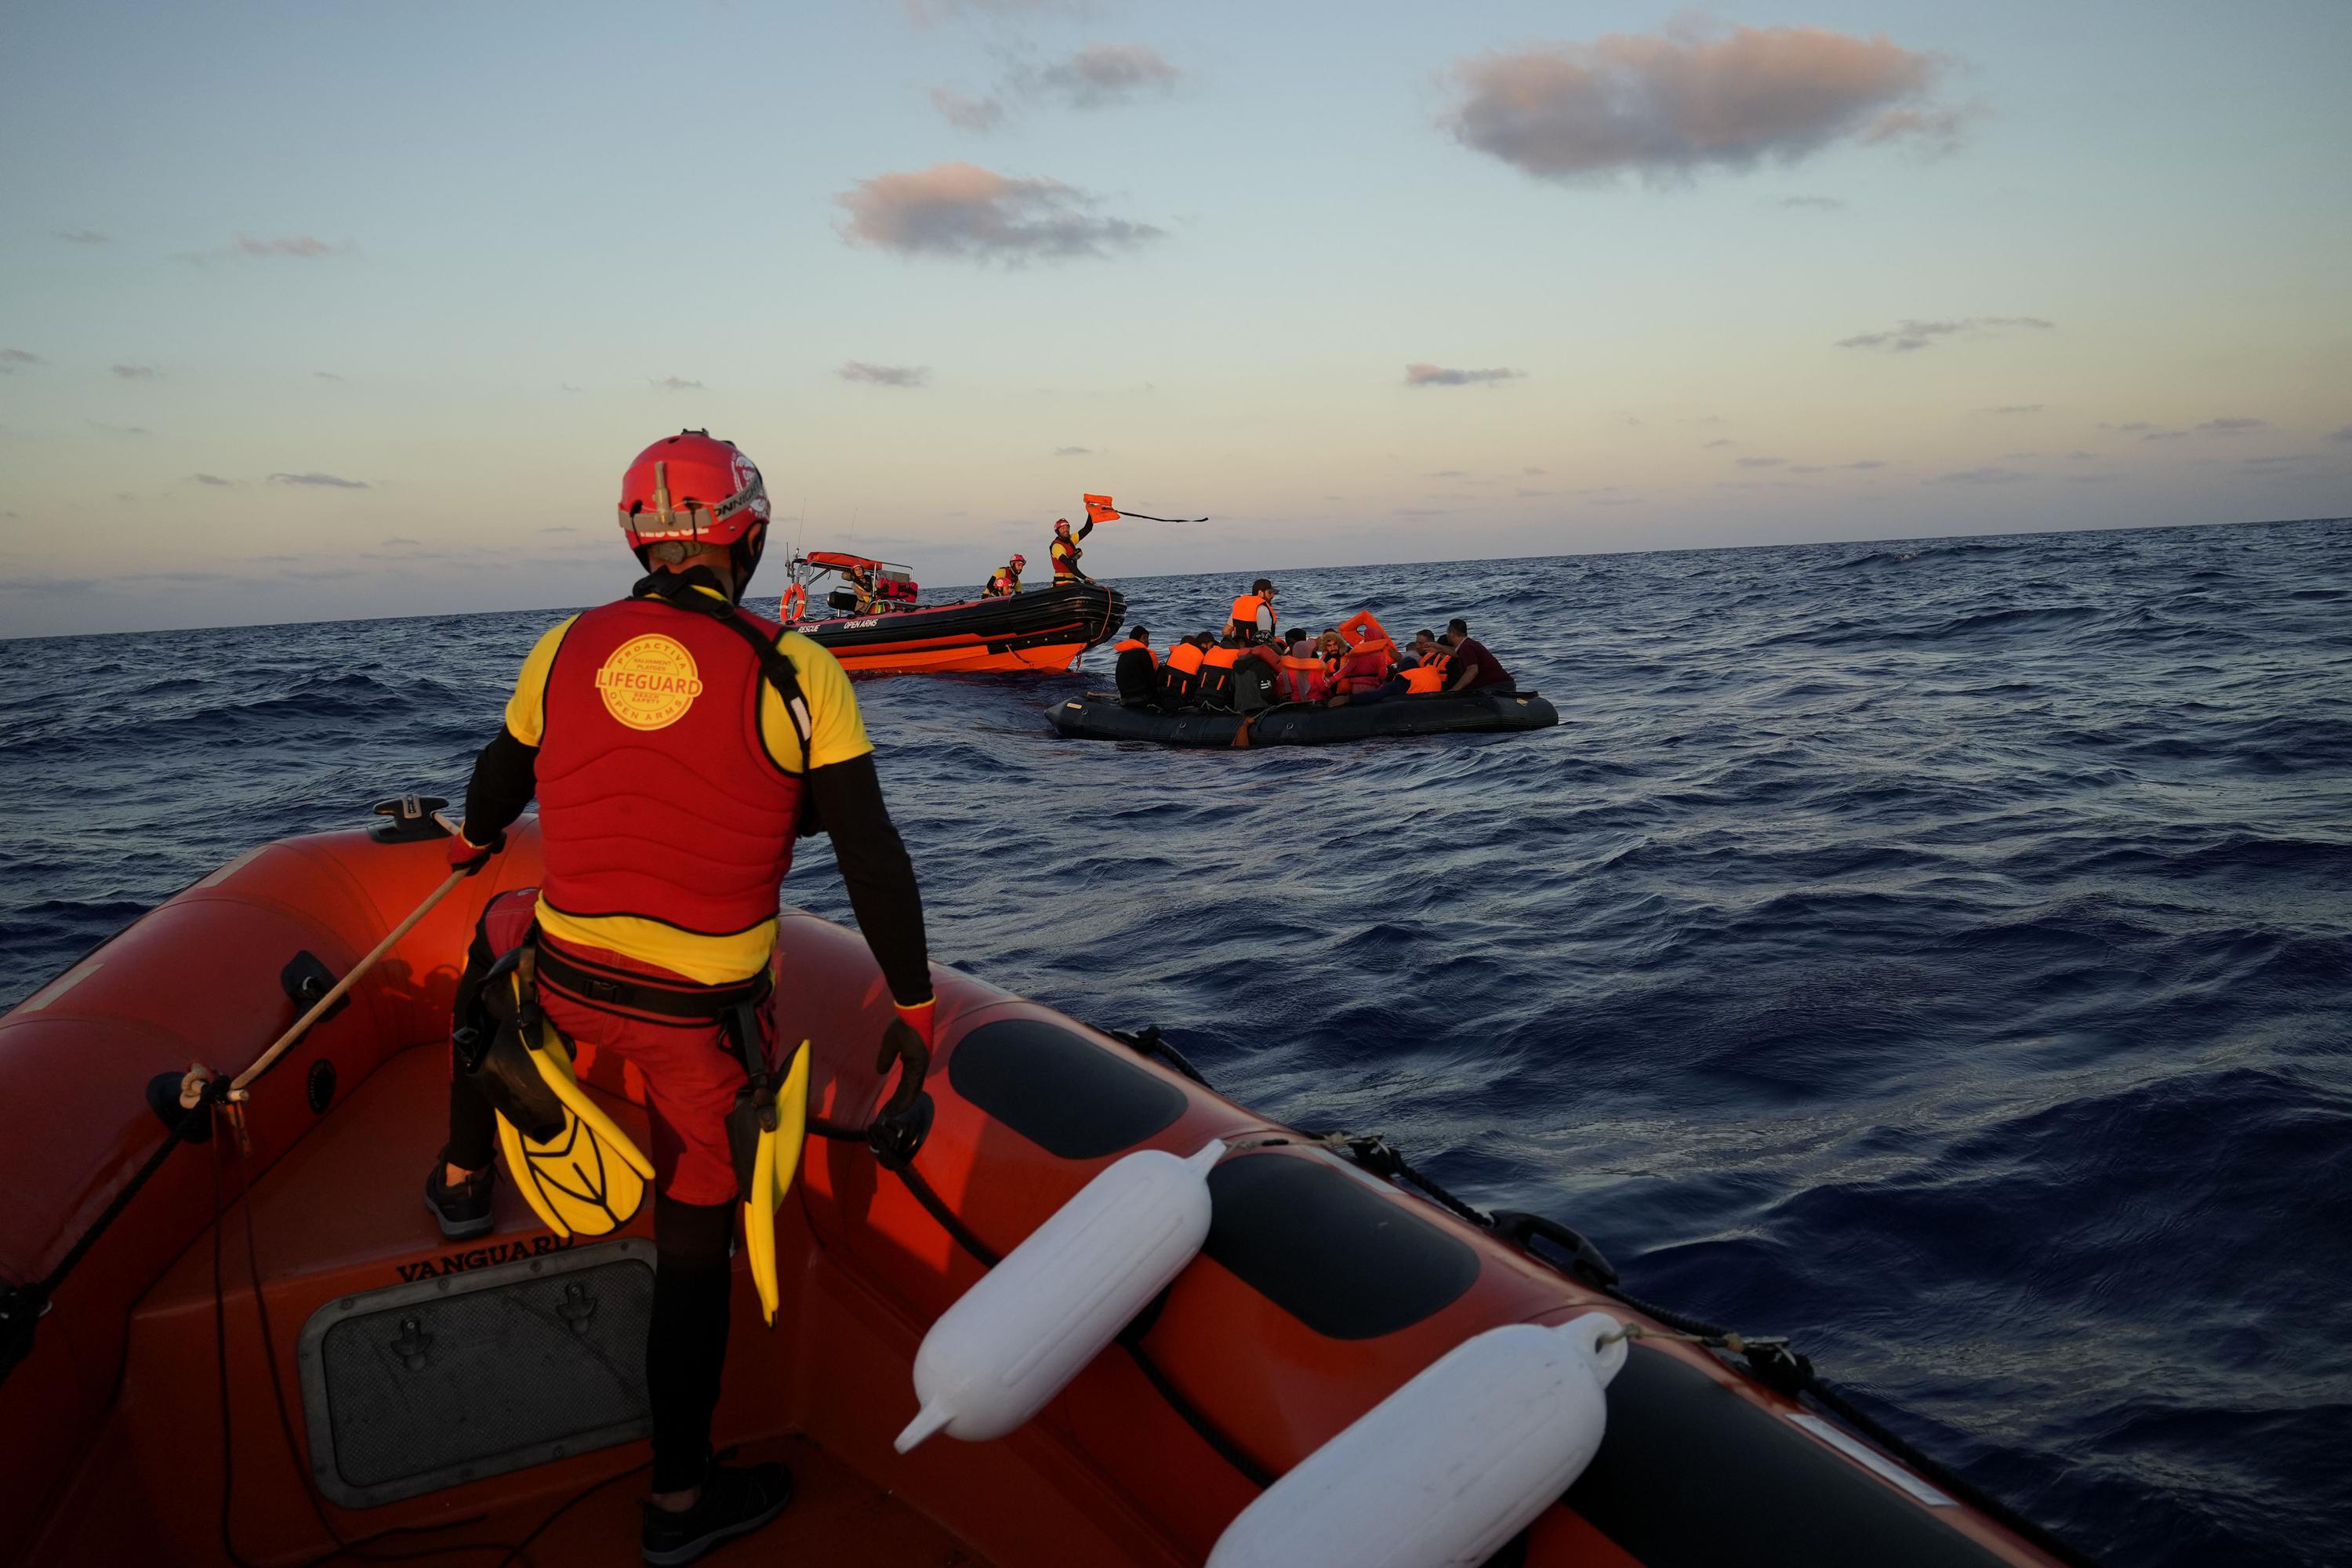 UN renews ship inspection Over smuggled migrants